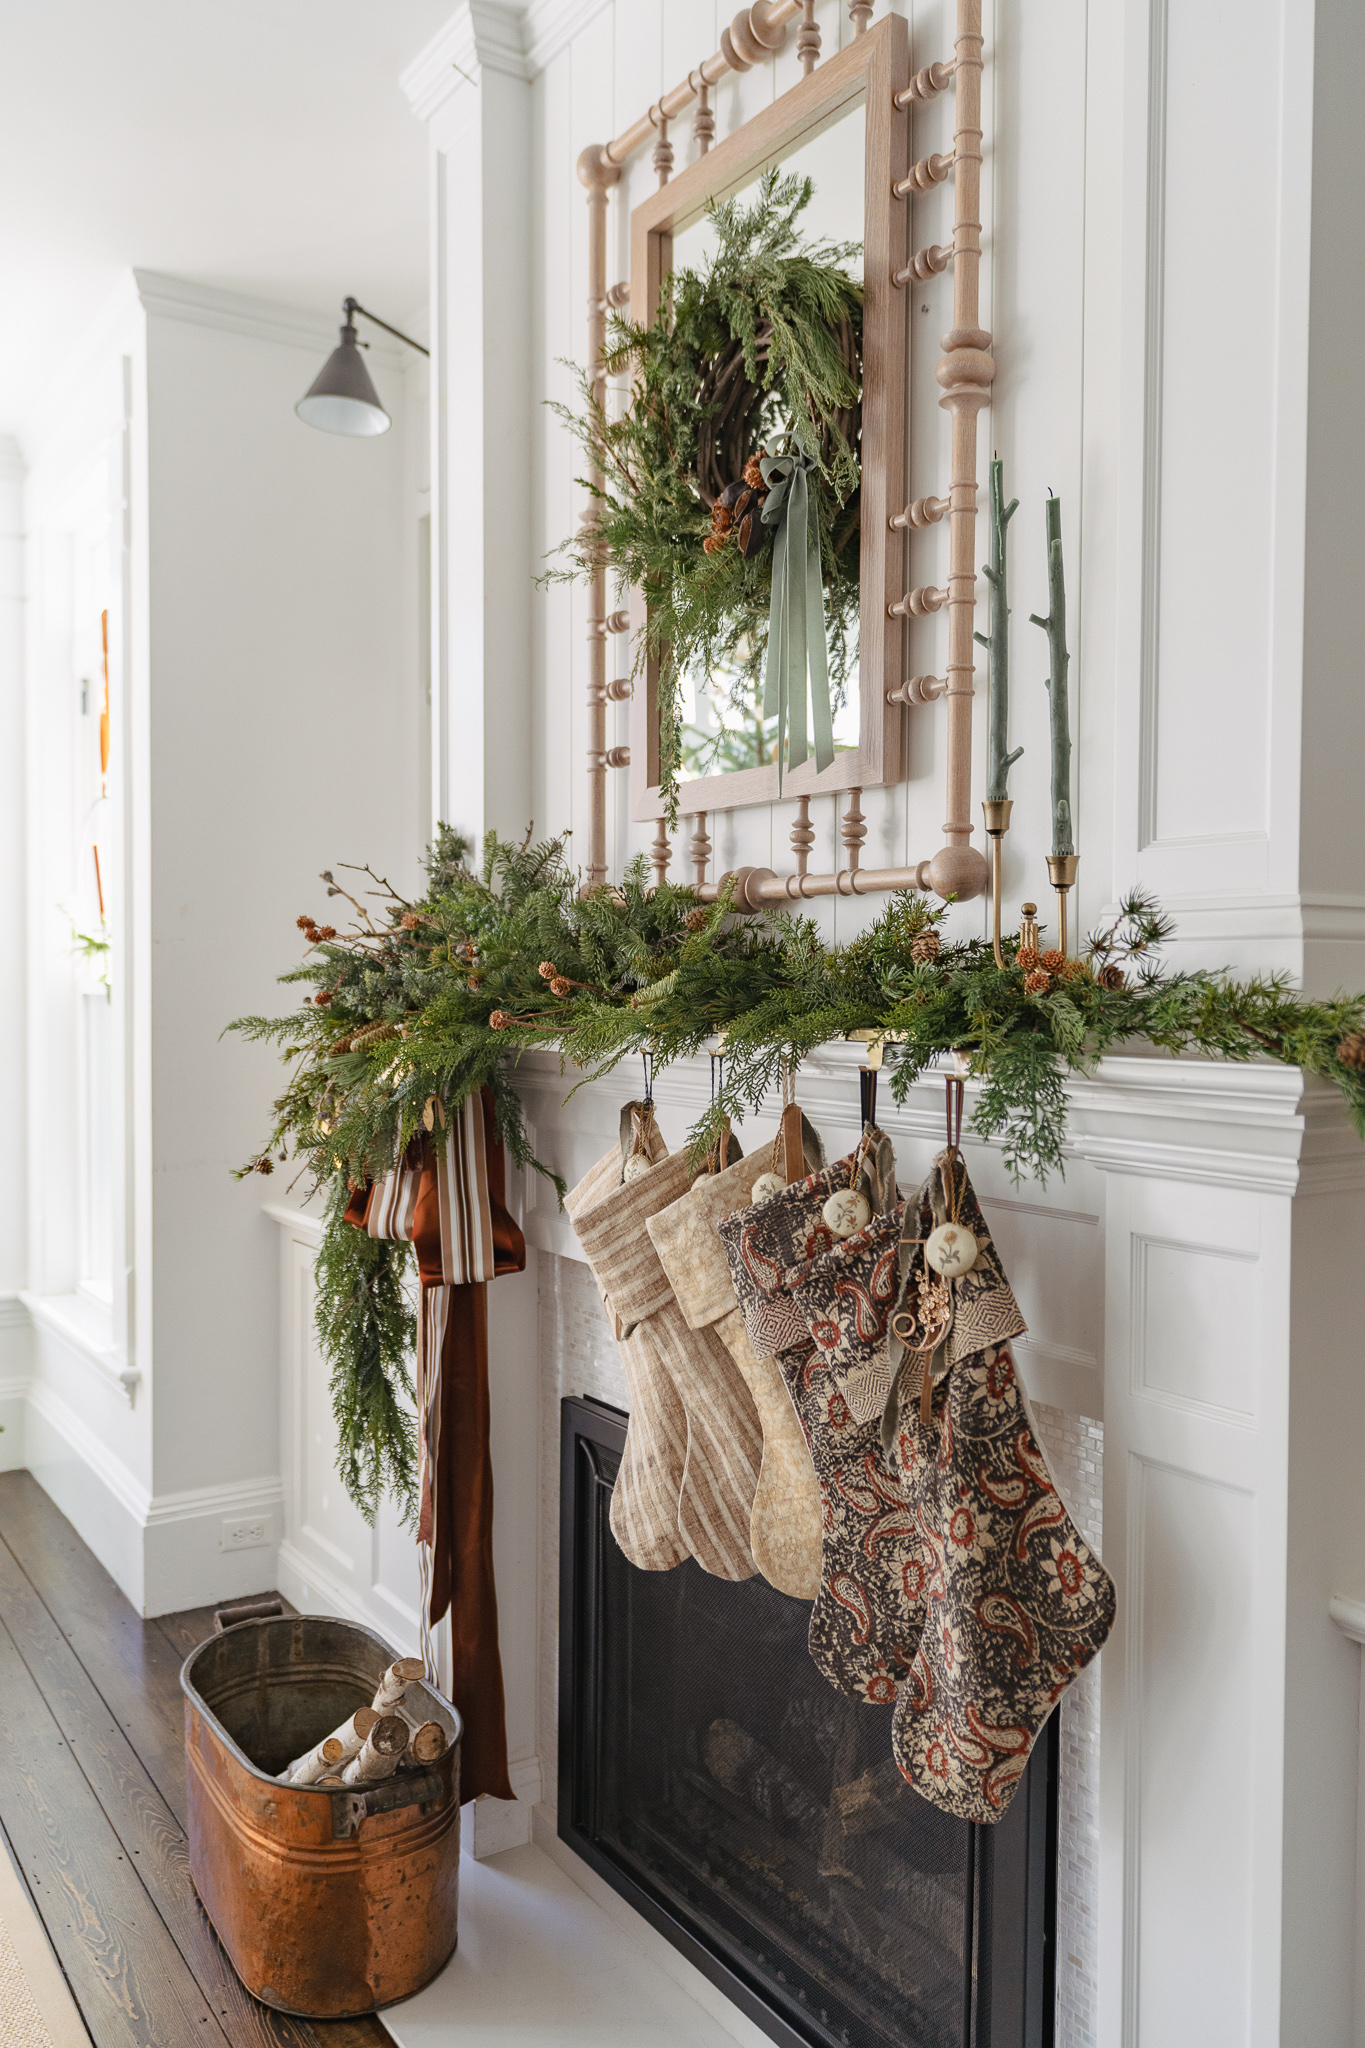 Stunning Christmas mantel with asymmetrical garland and vintage stockings